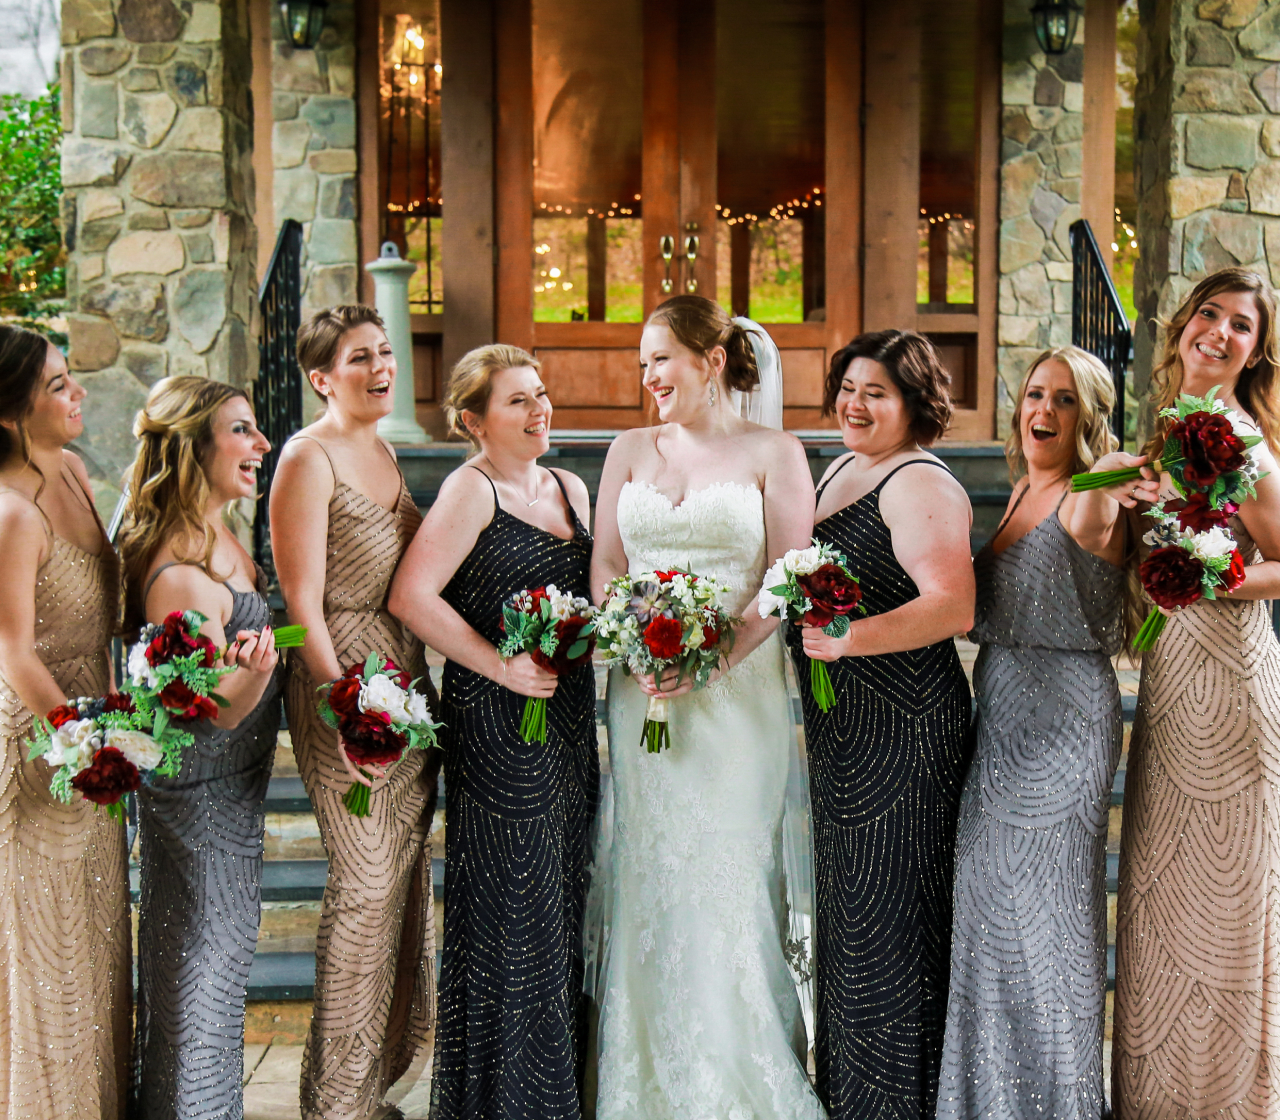 Why should you resale bridesmaid dresses online?